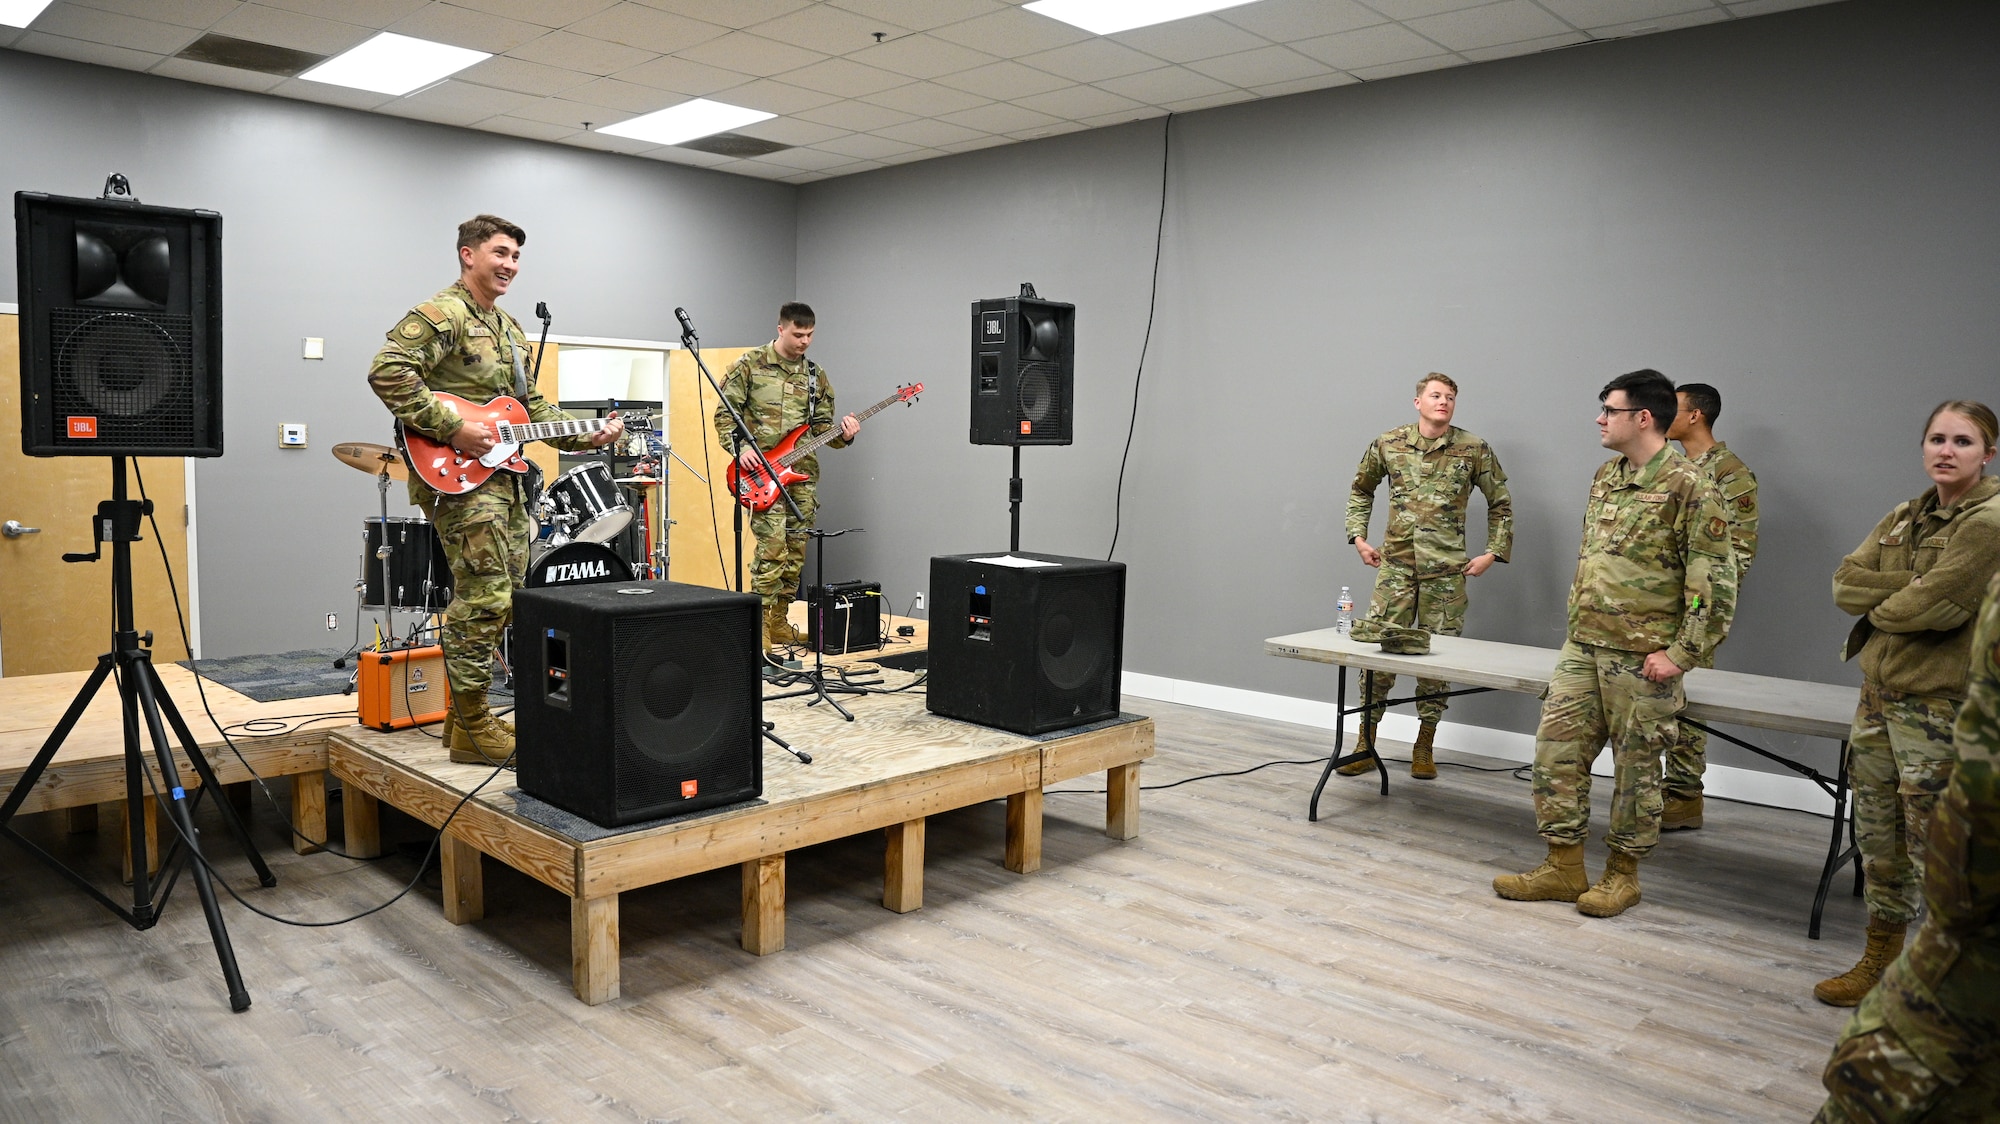 Left, Senior Airman Bailey Brazil, 309th Aircraft Maintenance Group, and Senior Airman Vincent Toth, 421st Fighter Generation Squadron, play music during a grand opening of the Airman Recreation Center at Hill Air Force Base, Utah.